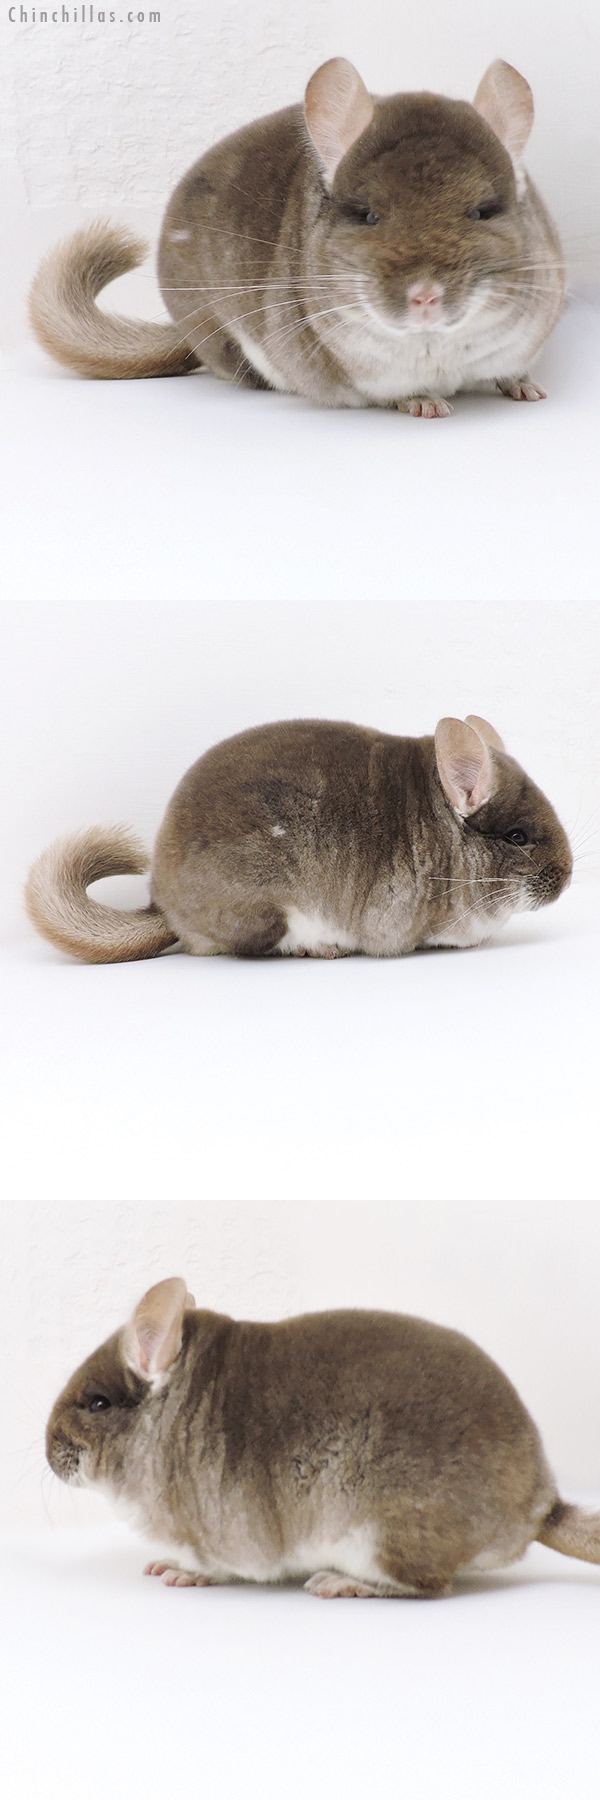 Chinchilla or related item offered for sale or export on Chinchillas.com - 18253 Blocky Show Quality TOV Beige / Brown Velvet Male Chinchilla